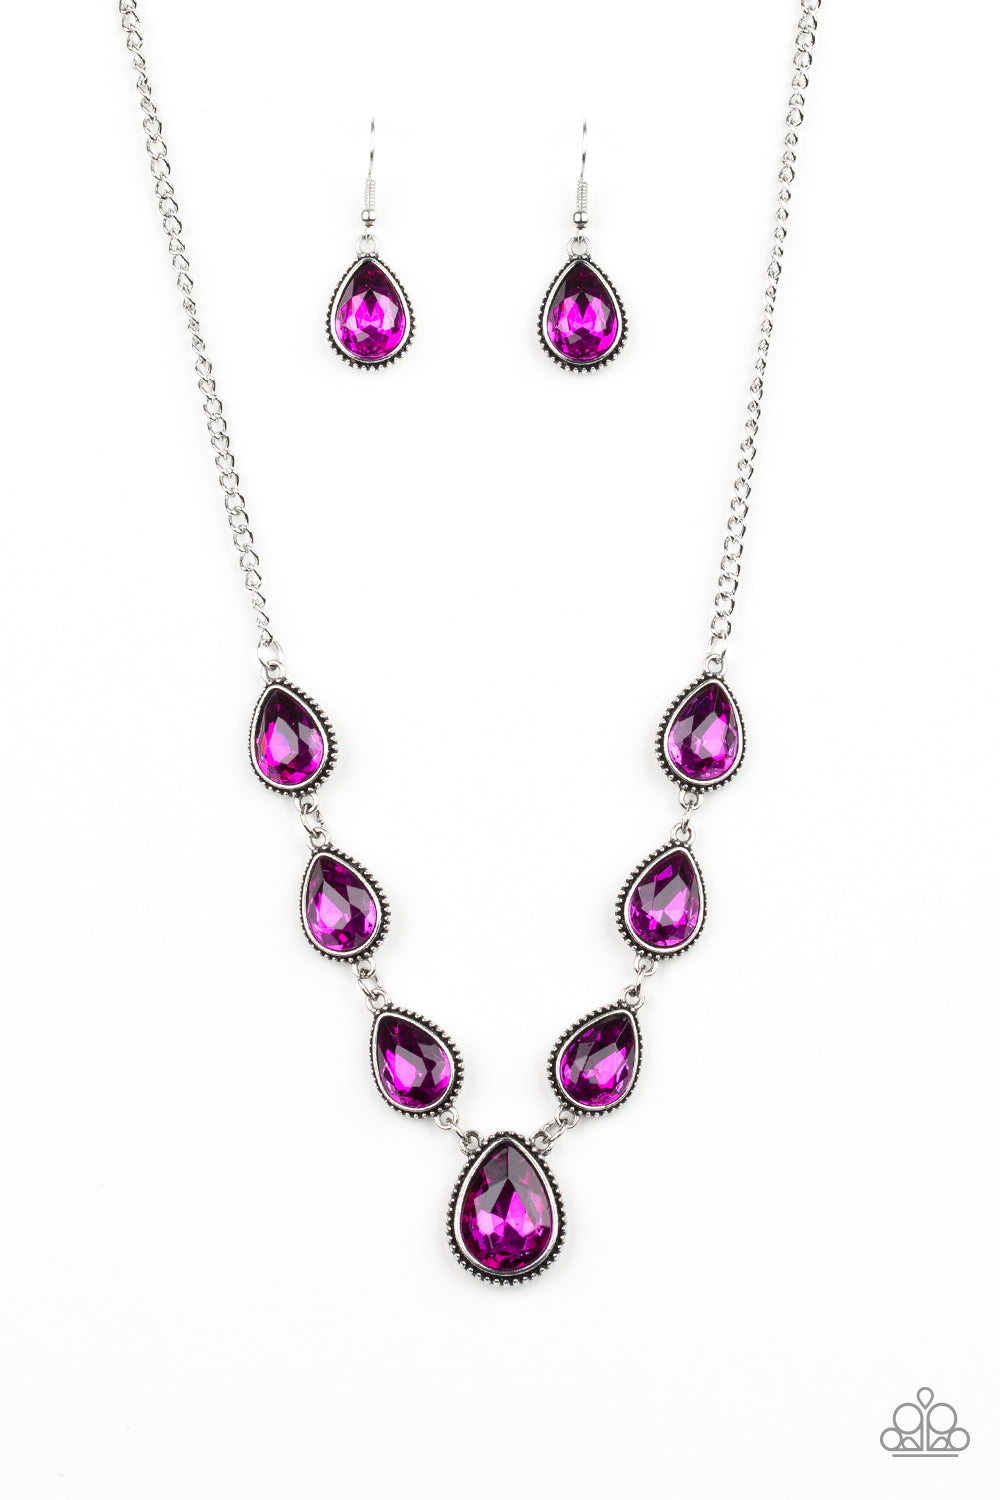 shop-sassy-affordable- pink-necklace-6-324-1018-paparazzi-accessories